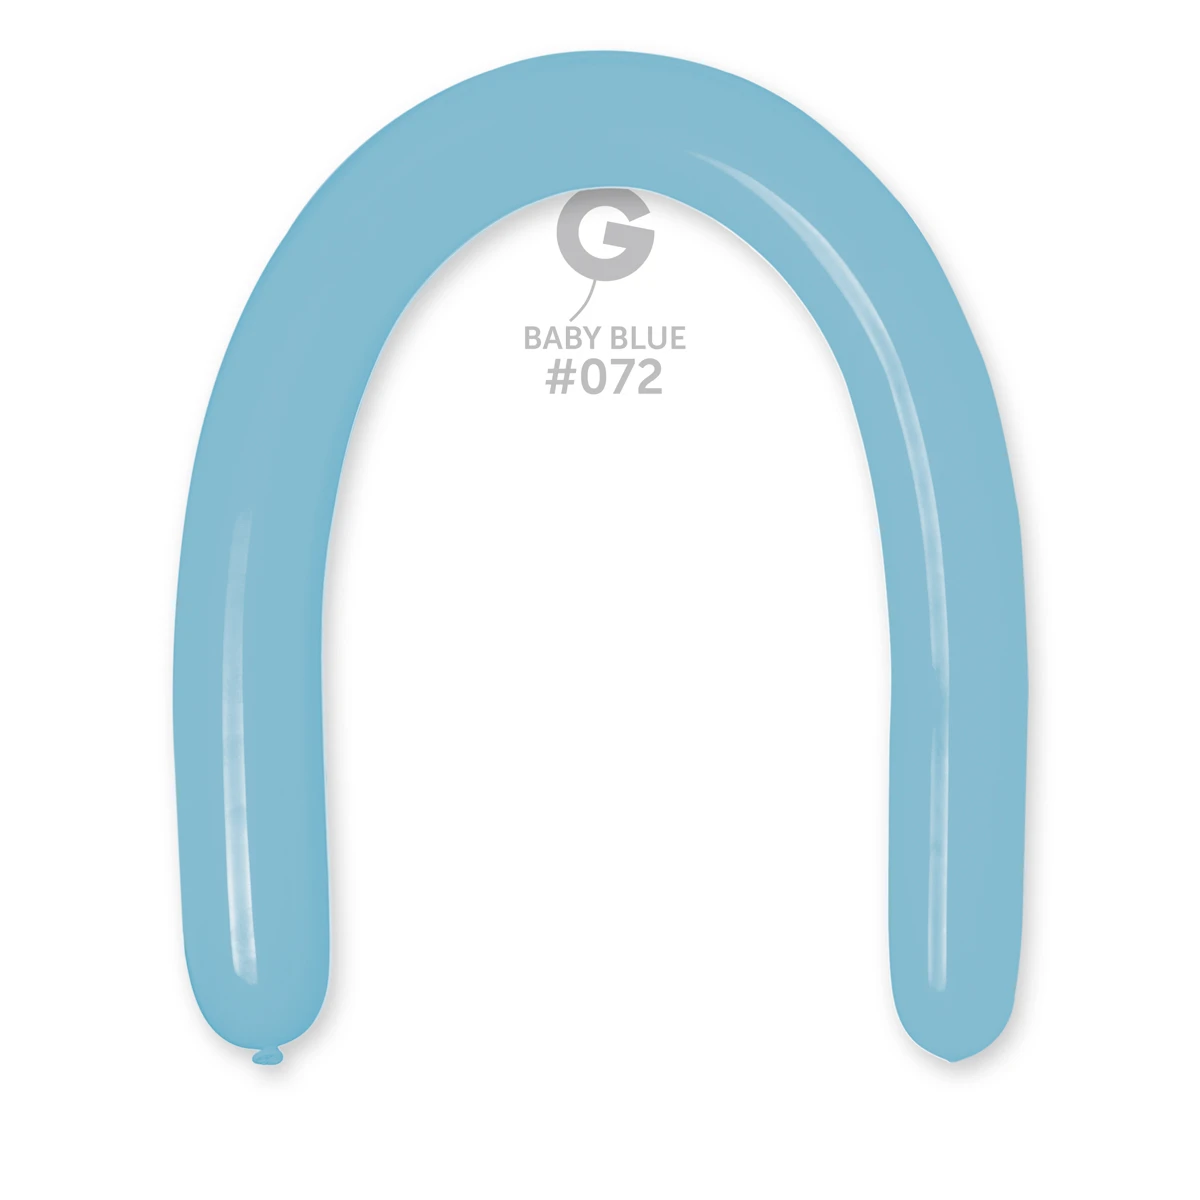 Standard Baby Blue #072 3in – 50 pieces